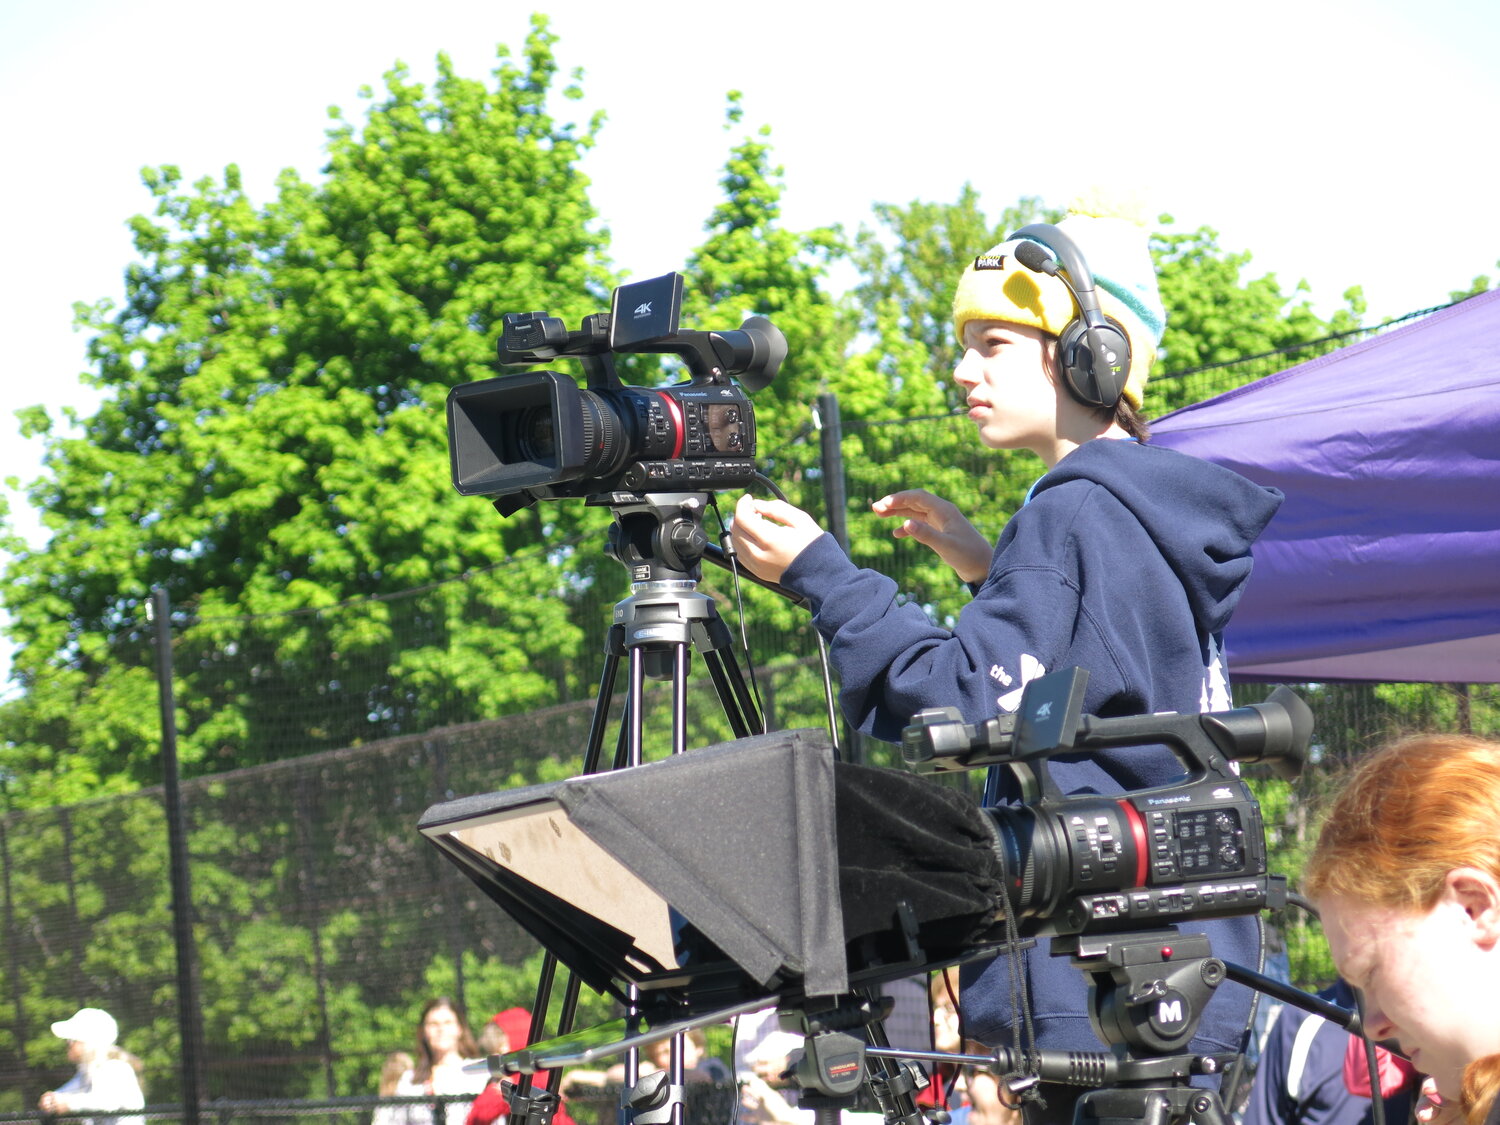 Noah Kingsley, above, a seventh-grader at OBHS, helped with the filming of the event for BayNews Now, for which students taking broadcasting classes.